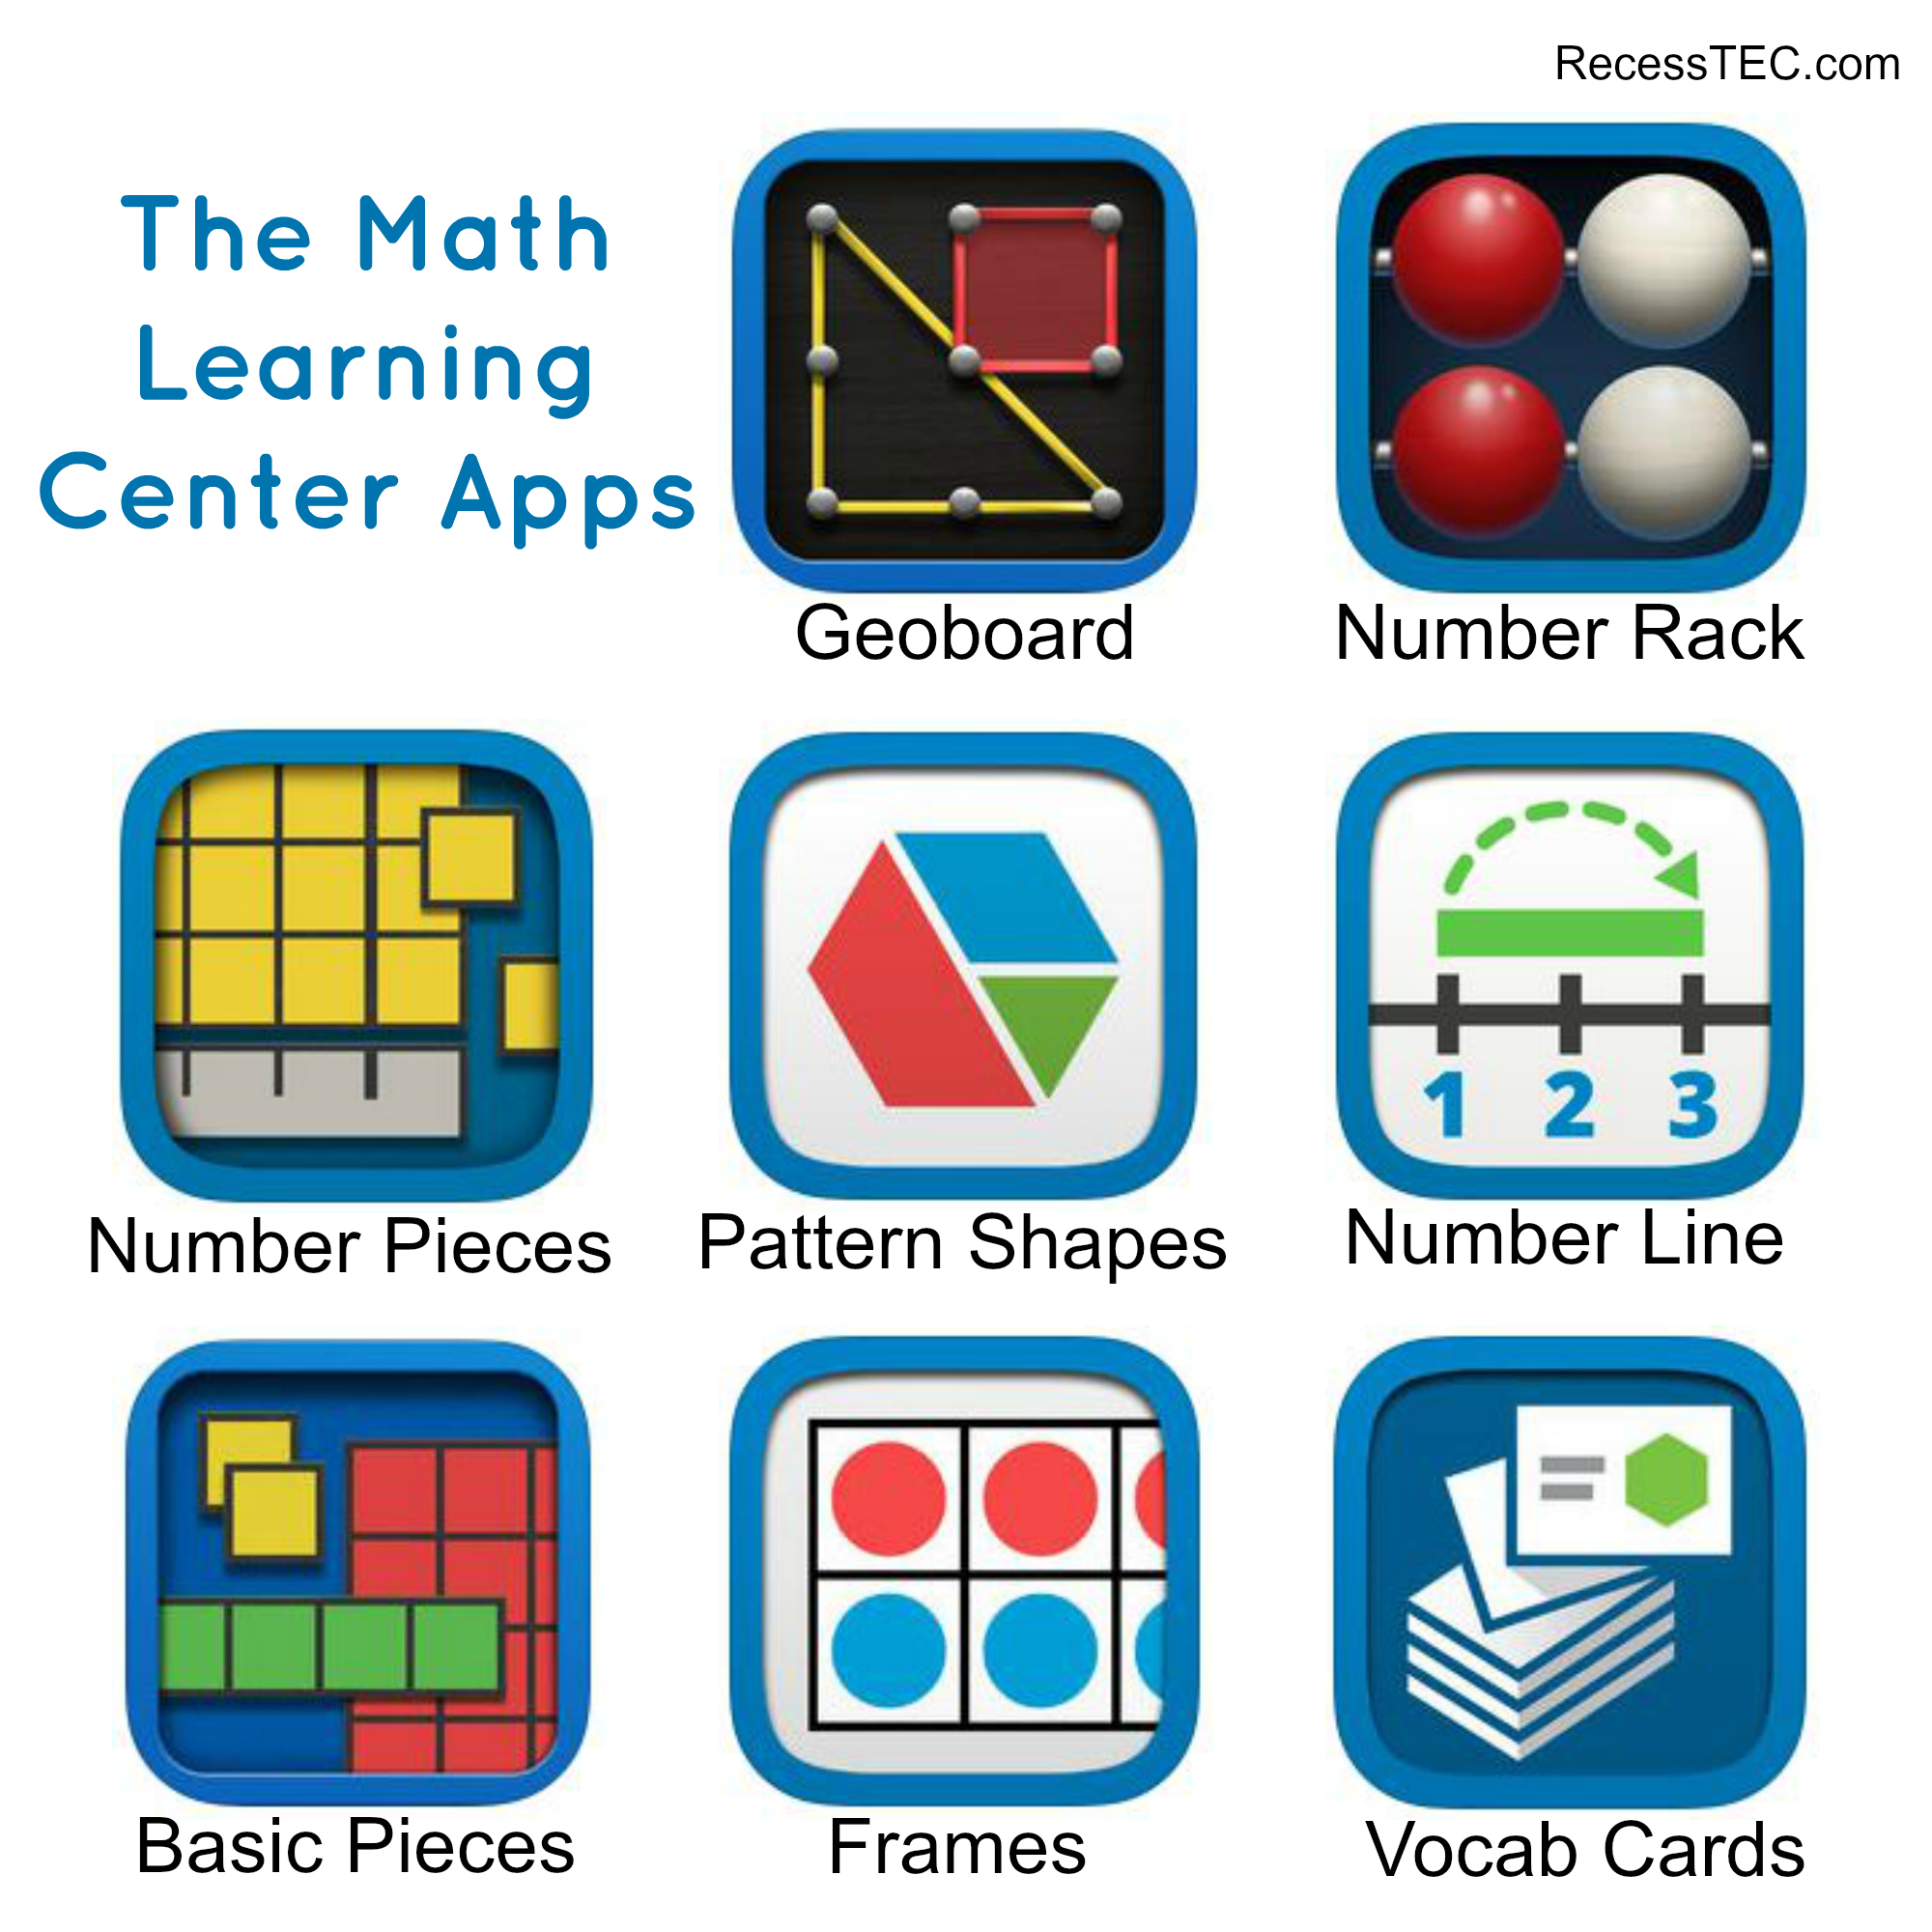 the-math-learning-center-apps-recesstec